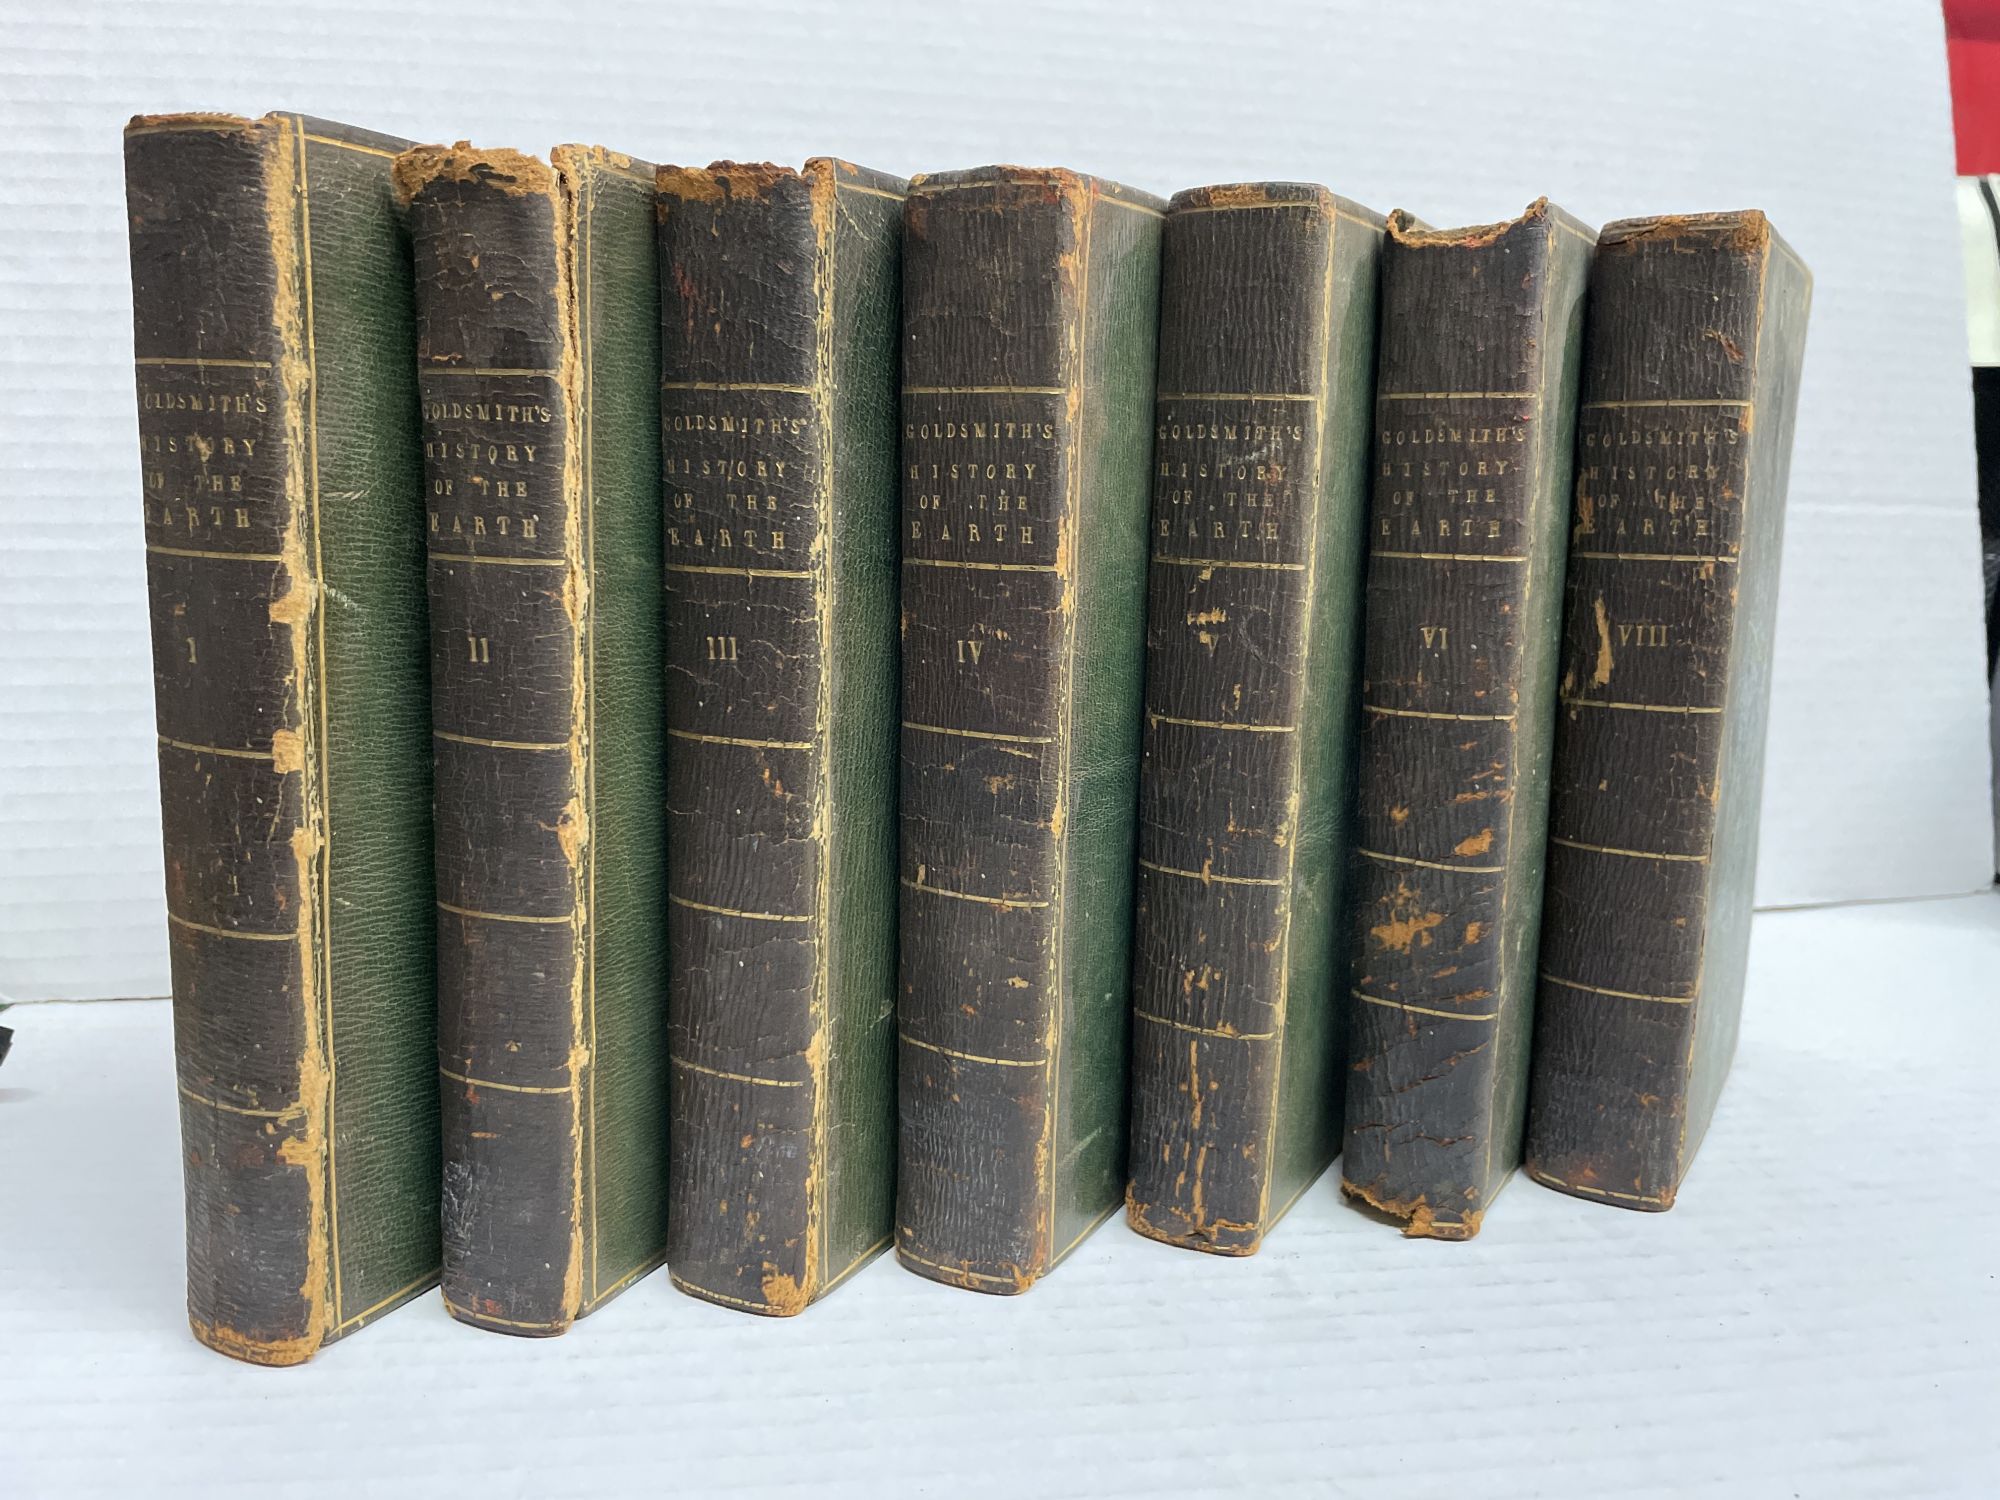 1350065 AN HISTORY OF THE EARTH AND ANIMATED NATURE; IN EIGHT VOLUMES [missing Vol. VII]. Oliver Goldsmith.